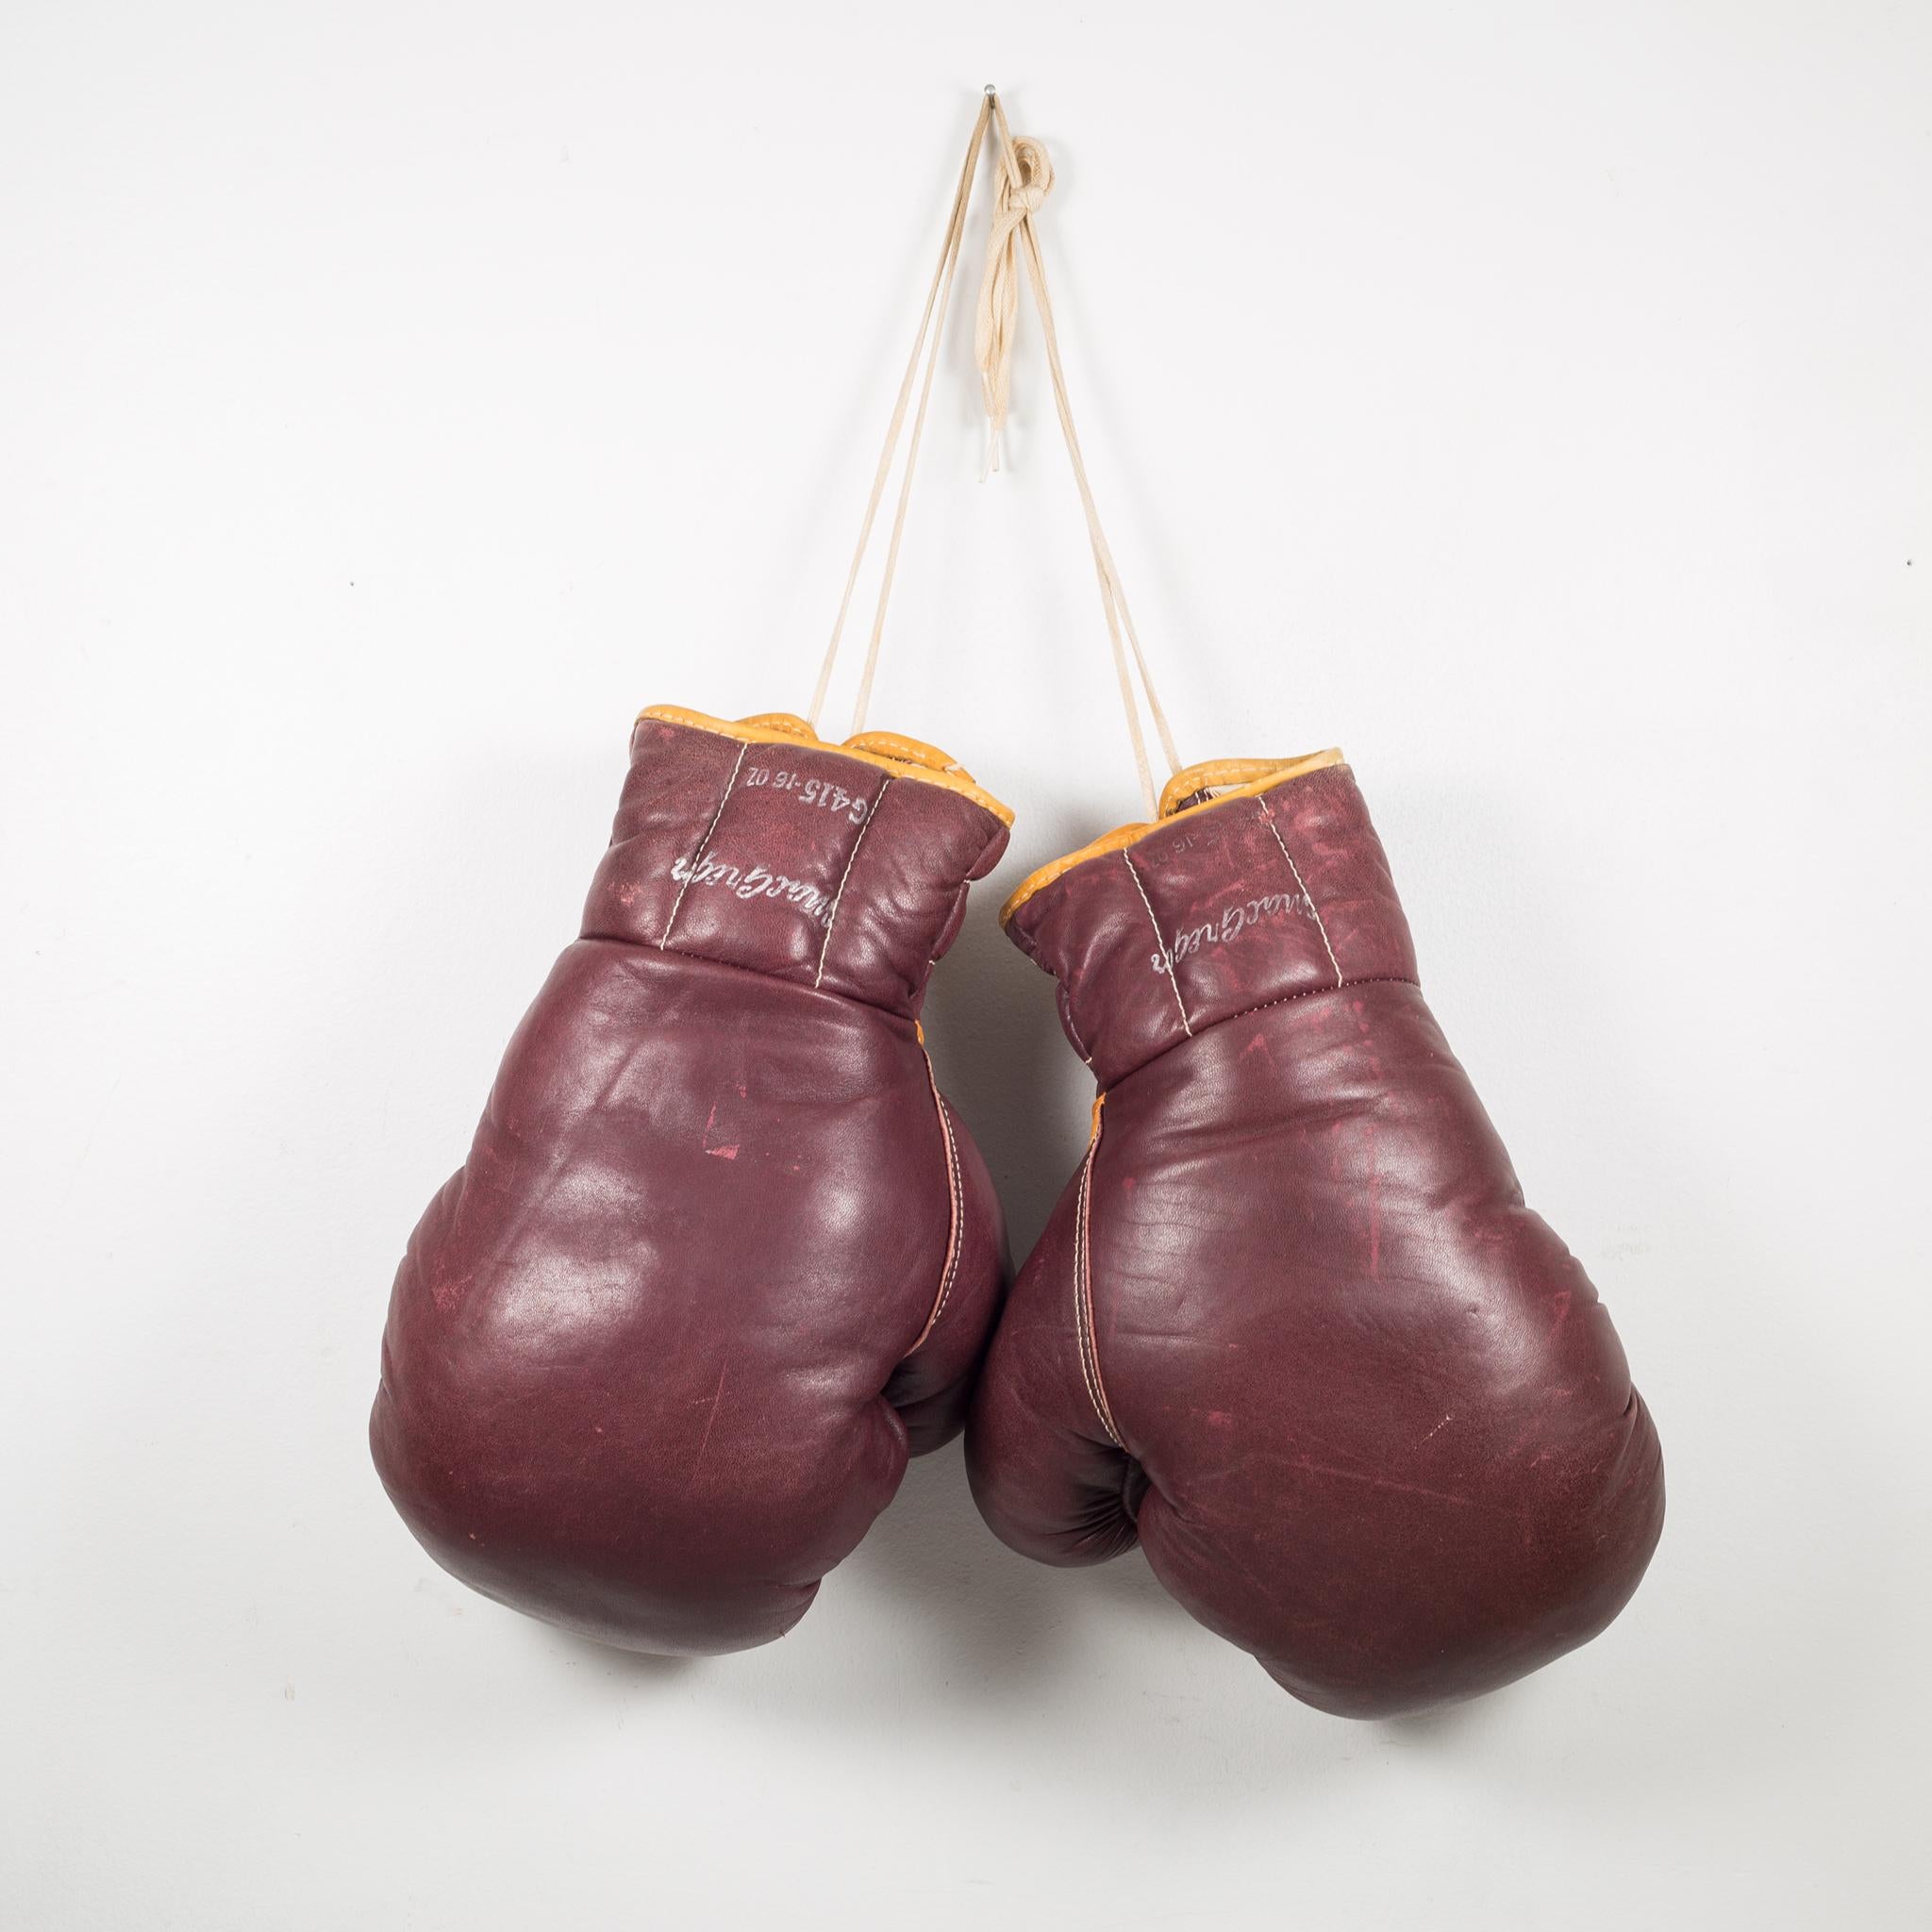 20th Century Leather MacGregor Boxing Gloves, circa 1950